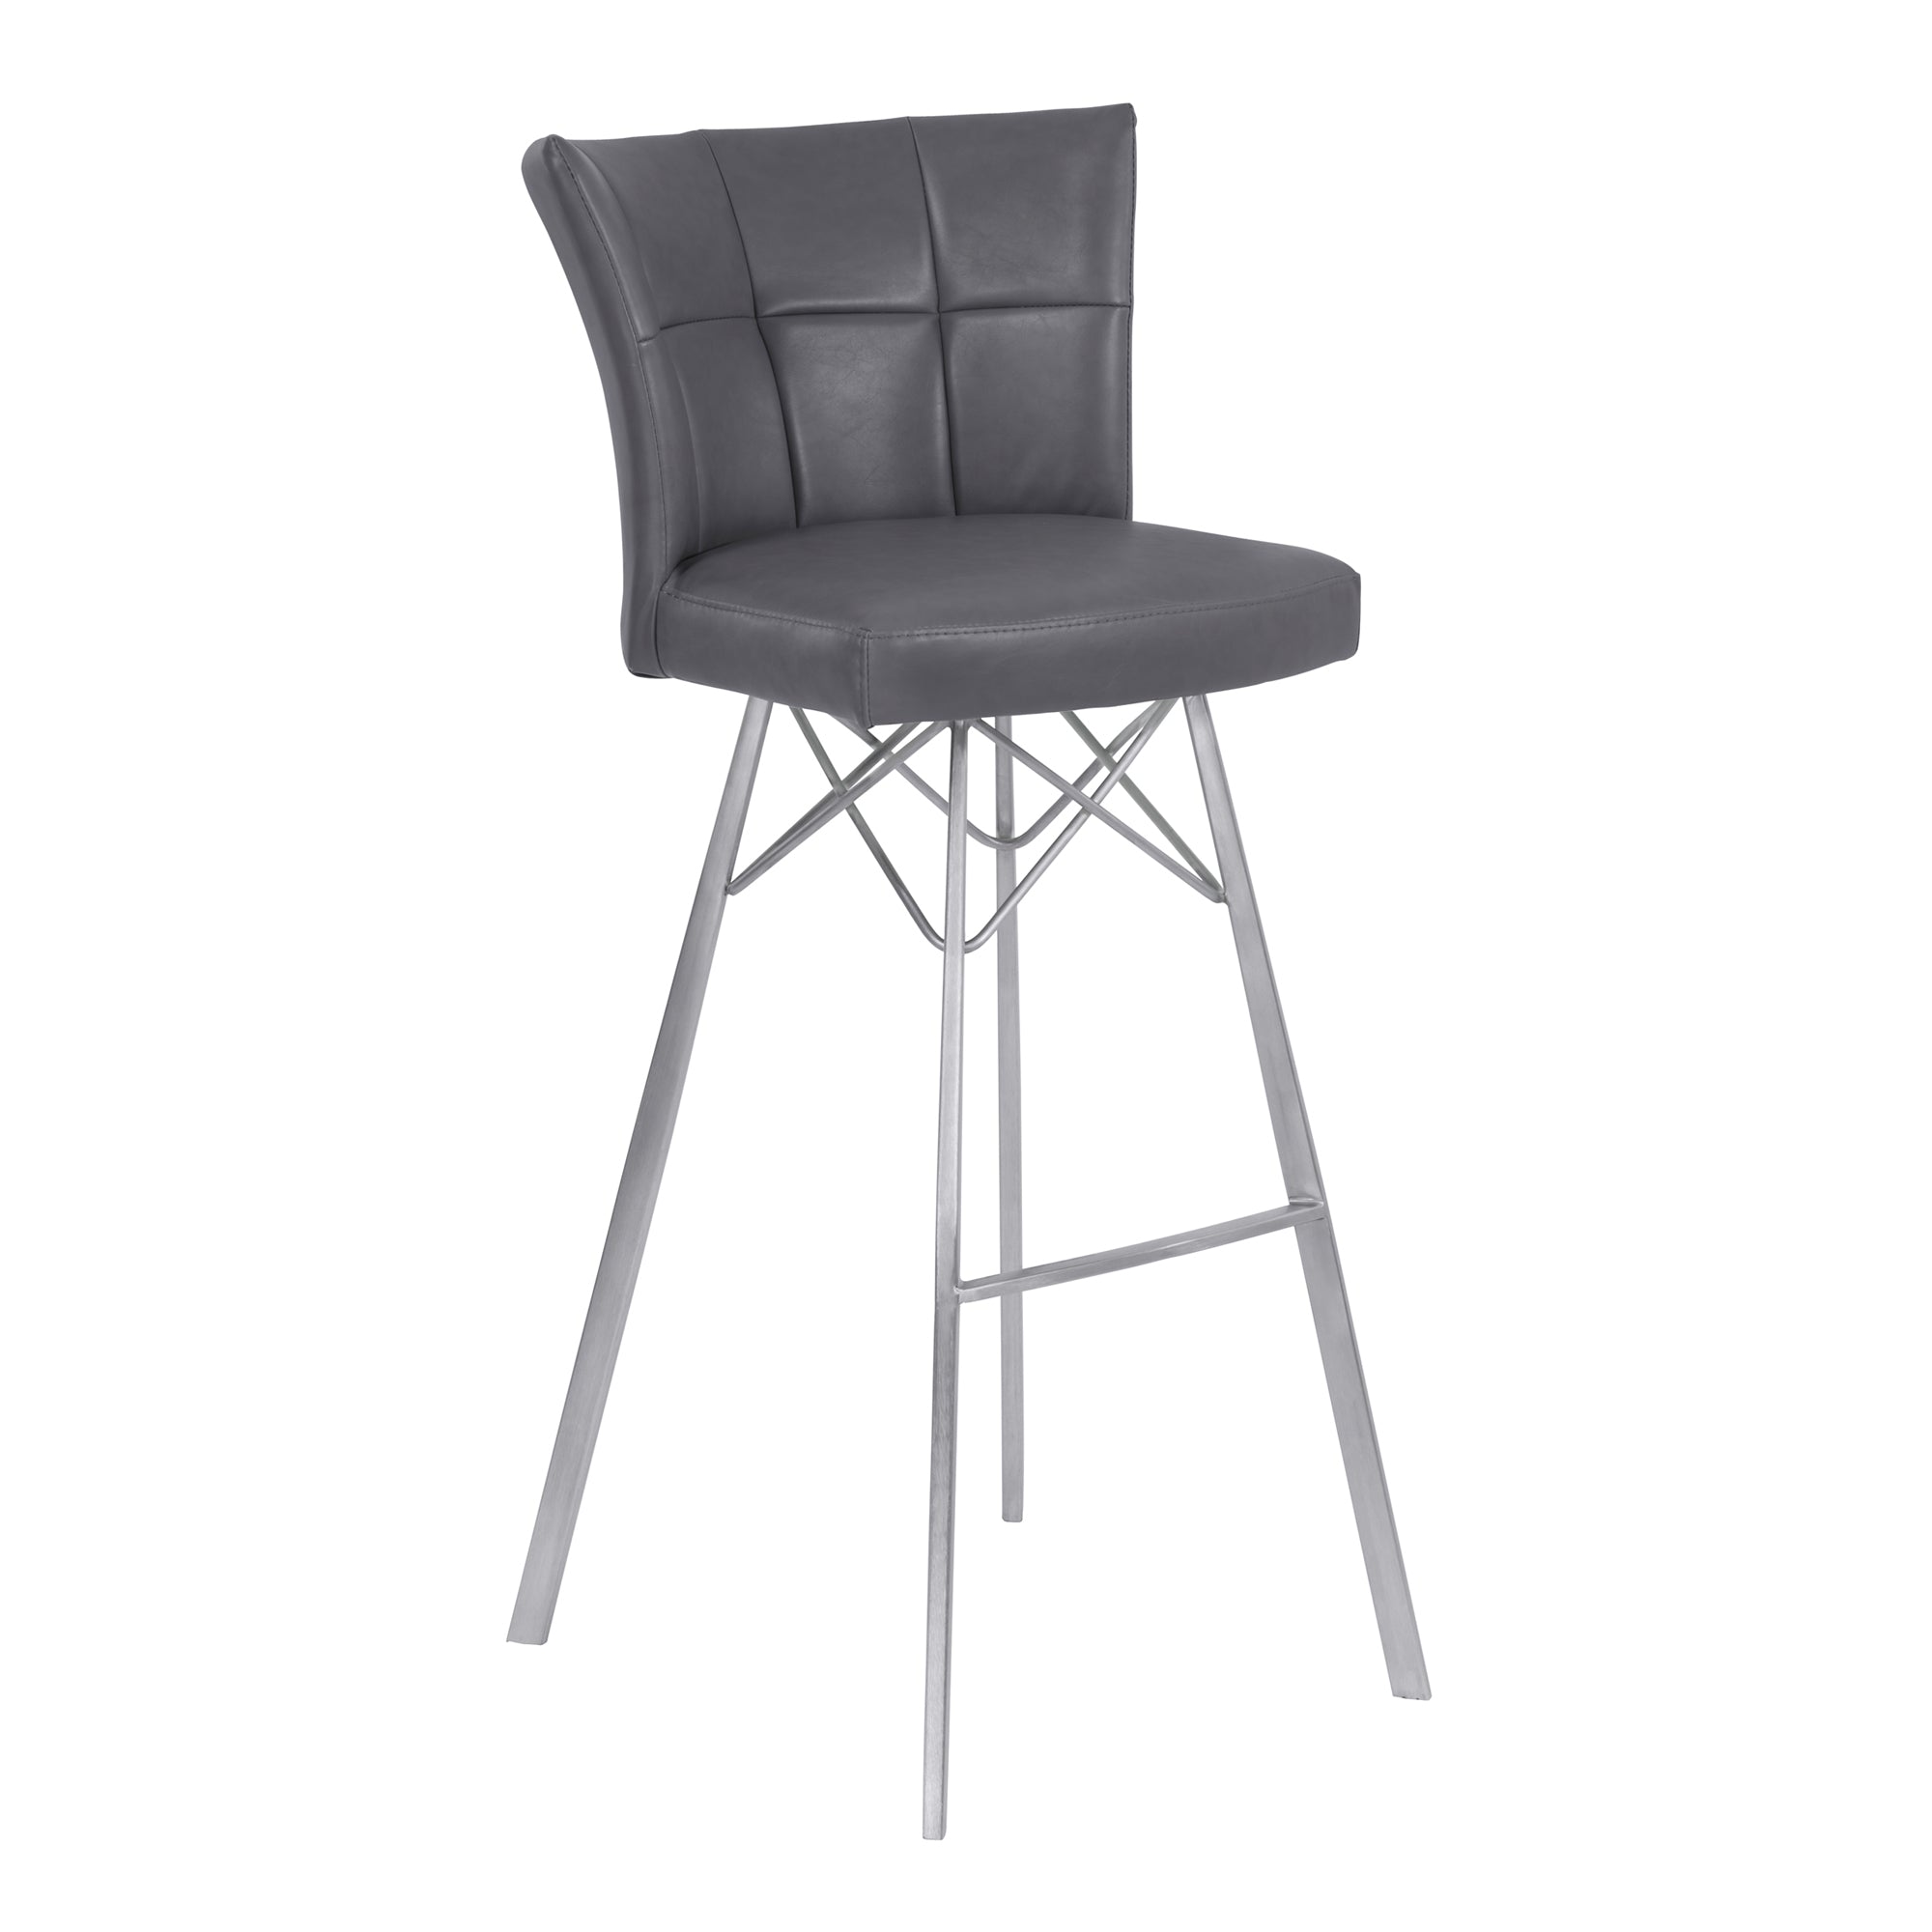 Armen Living Lcspbavgbs30 Spago 30" Bar Height Metal Barstool In Vintage Gray Faux Leather With Brushed Stainless Steel Finish